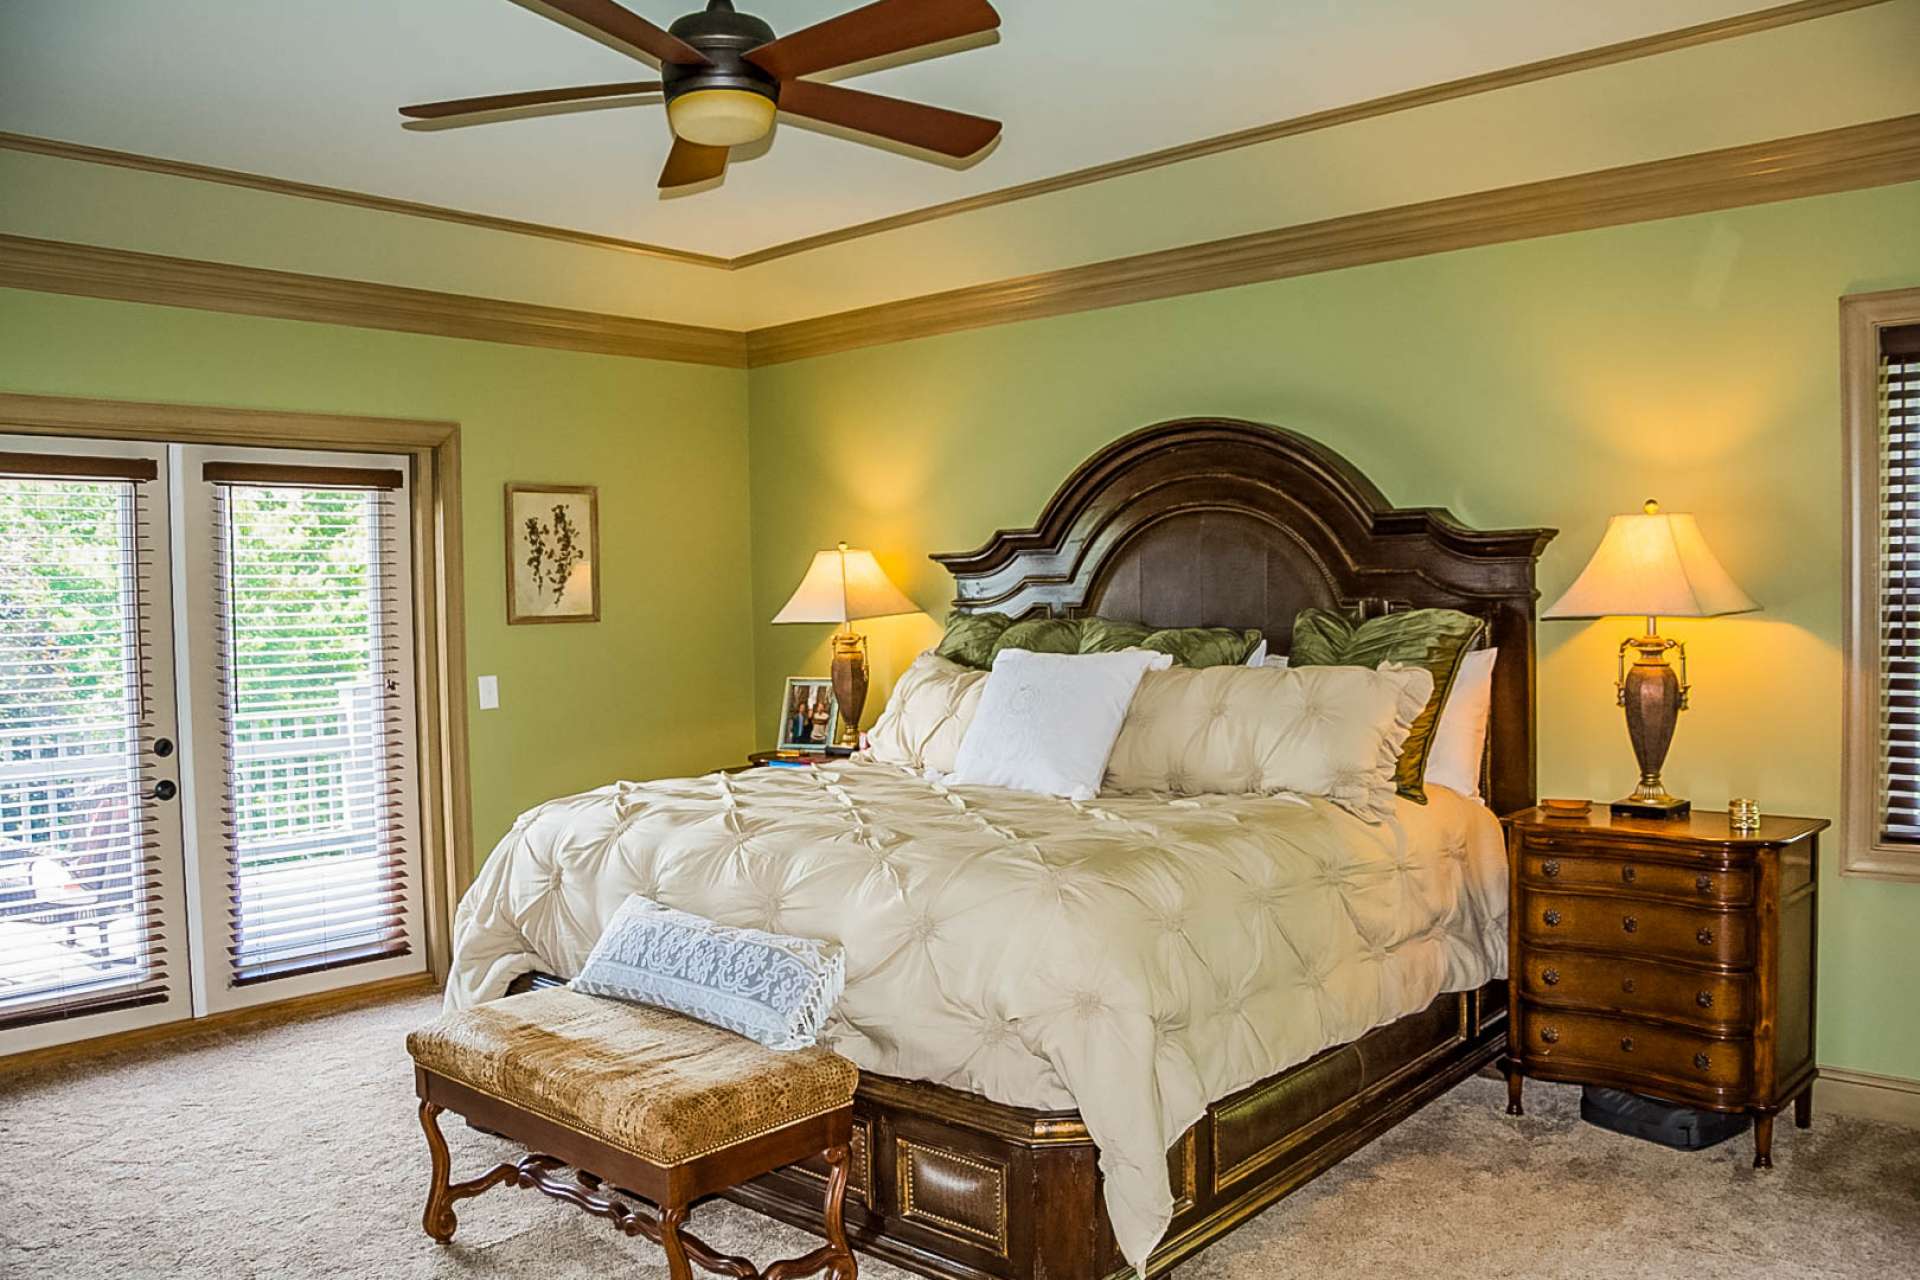 A lovely spacious main level master suite features private access to the back deck, and a luxurious private bath with air jet tub, tile shower, double vanity with vessel sinks and a walk-in closet.